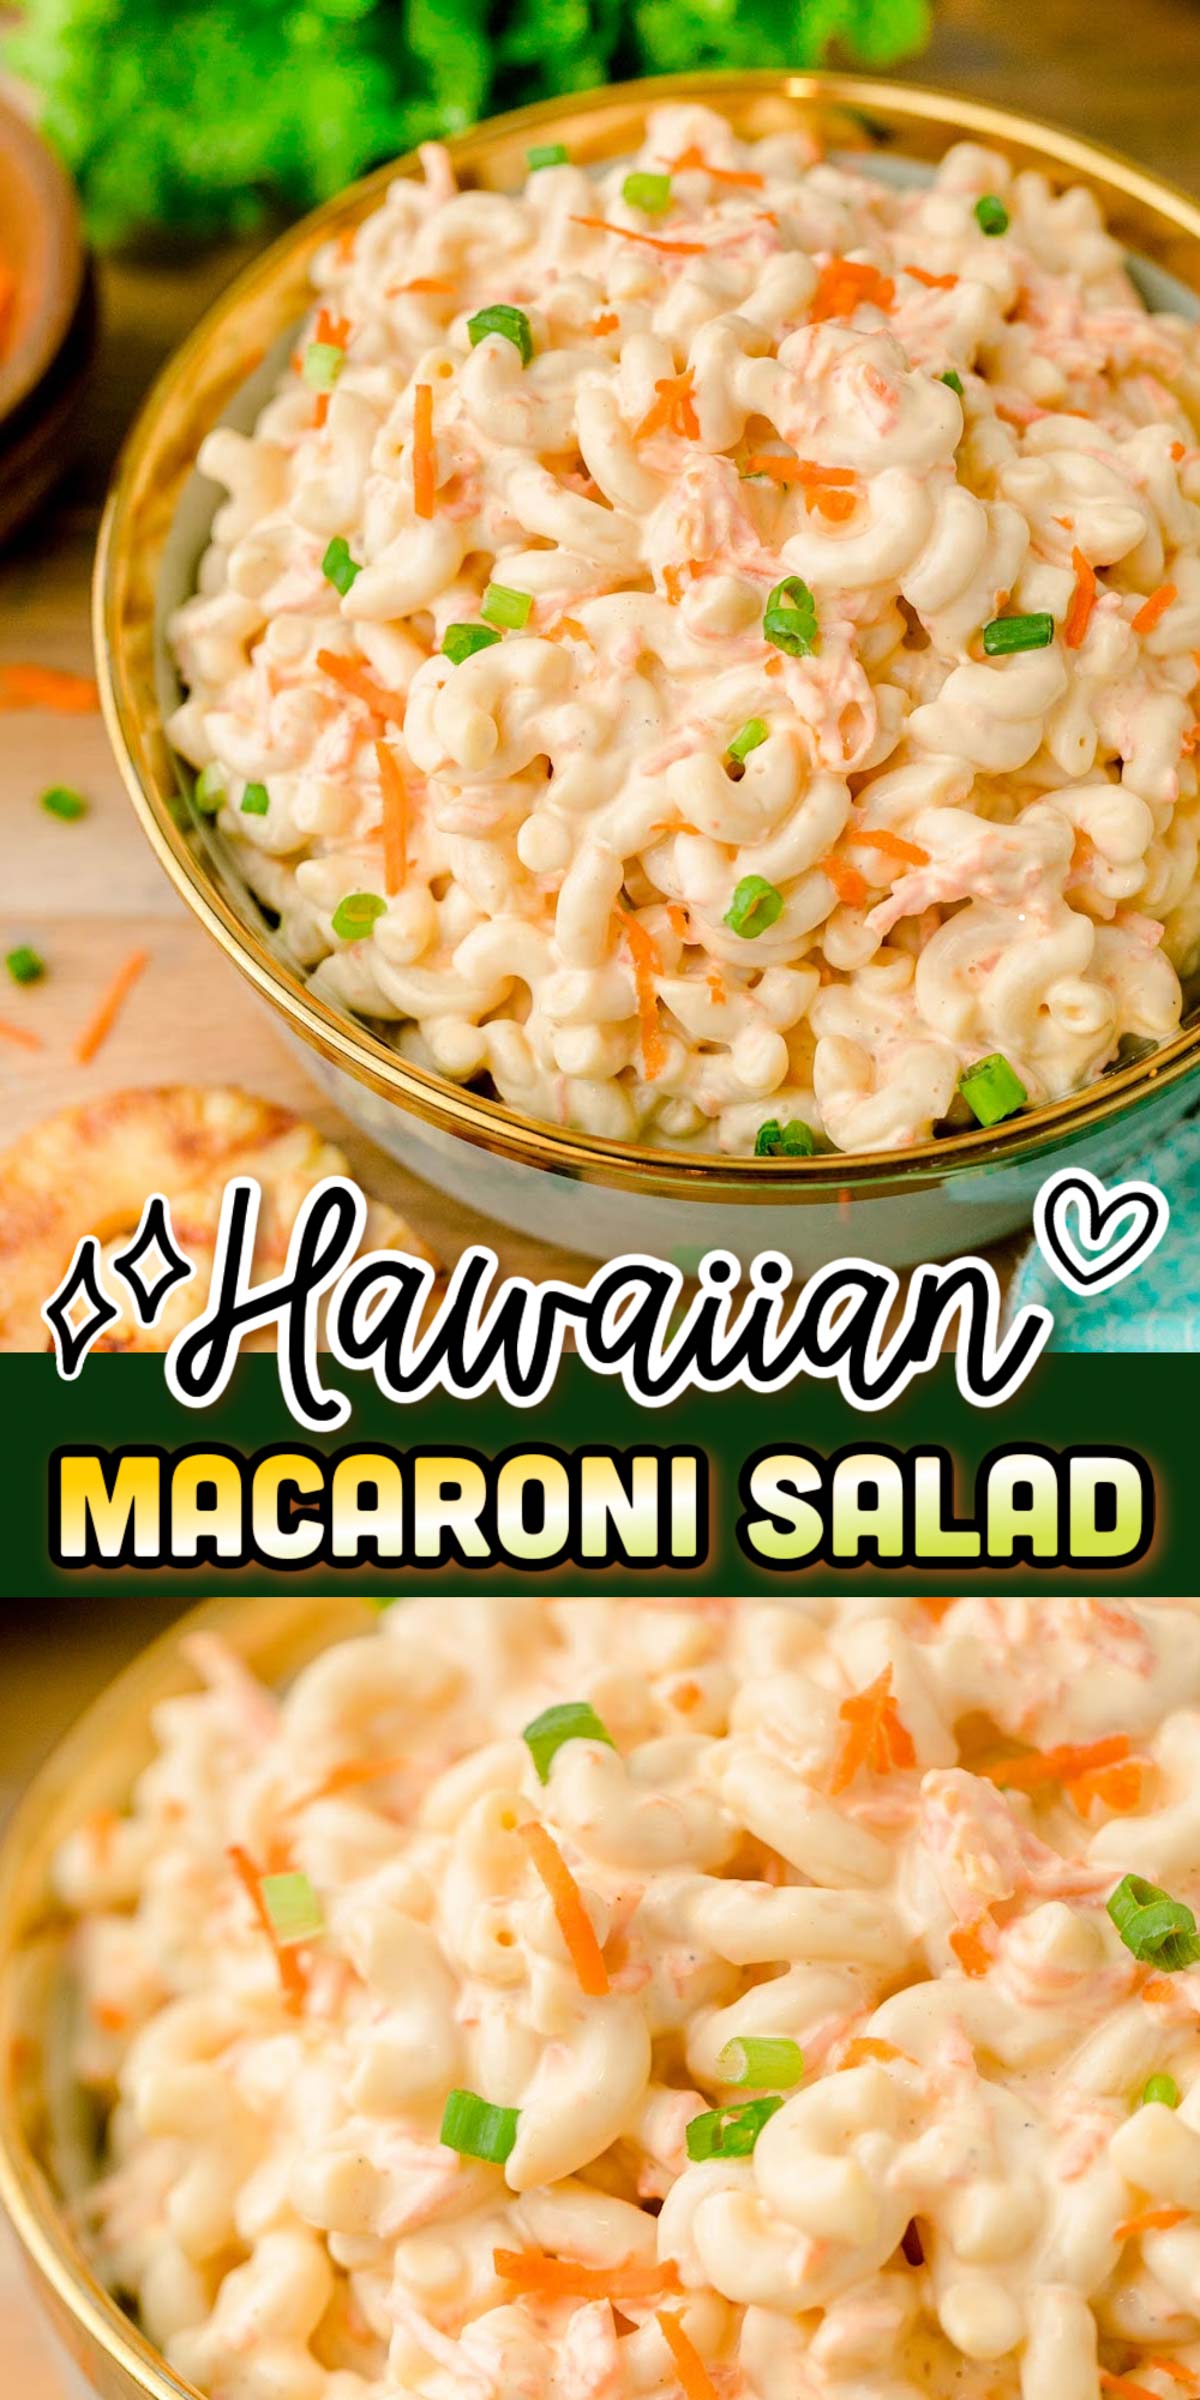 This Hawaiian Macaroni Salad is an easy-to-make authentic Hawaiian side dish that's cool and creamy with a tangy and subtly sweet taste! It takes just 20 minutes to prep and is perfect for BBQs! via @sugarandsoulco